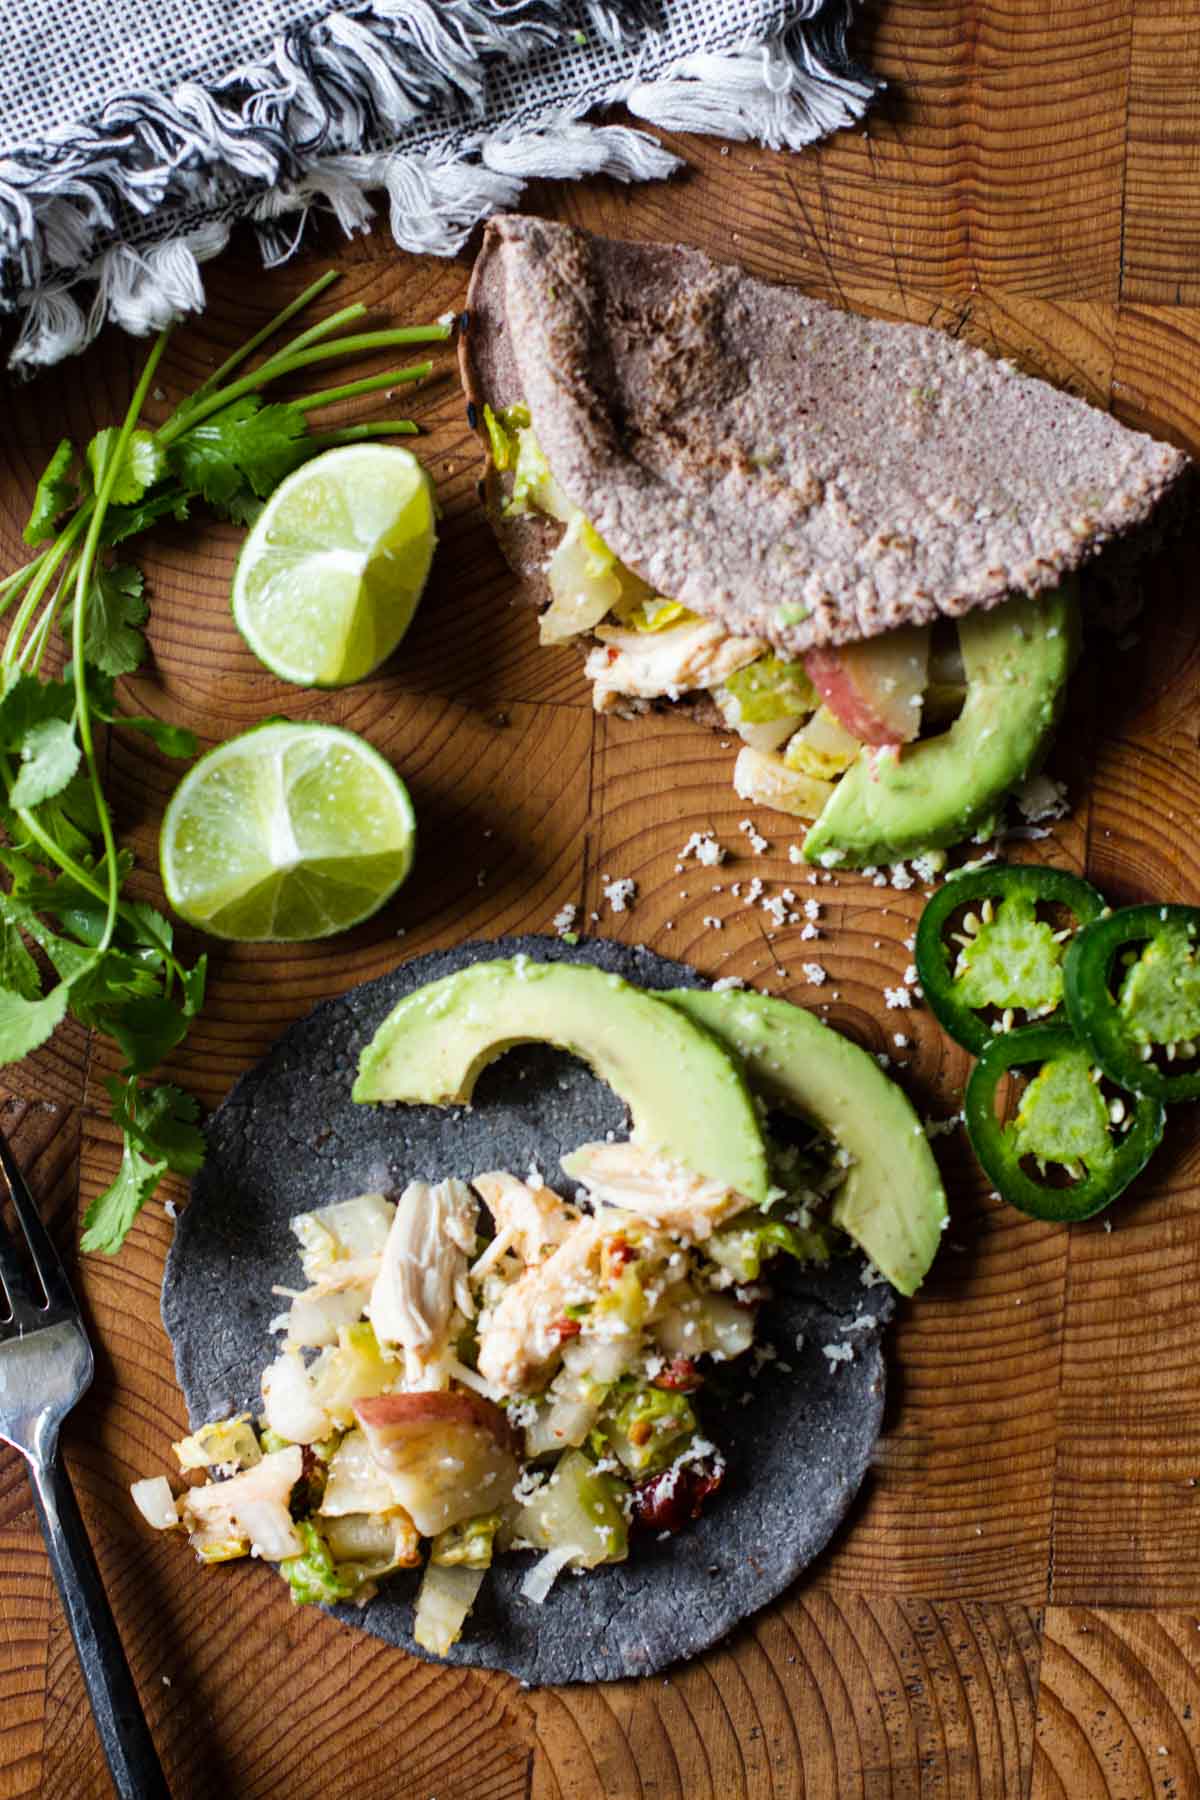 Rotisserie chicken tacos with potatoes, avocado and romaine.